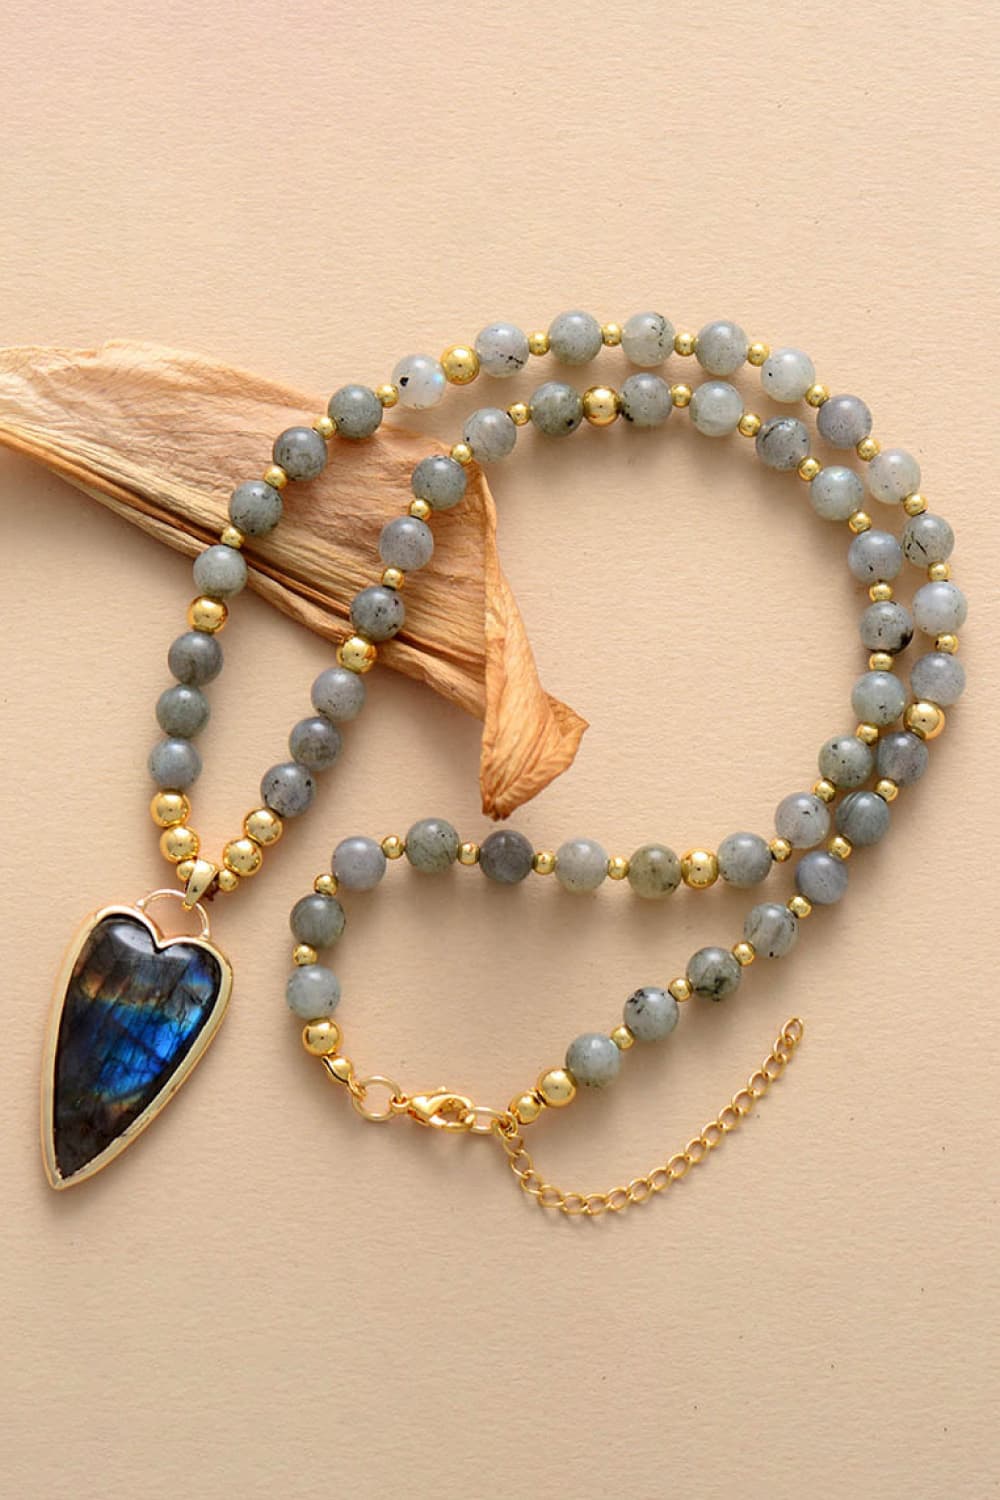 Handcrafted Natural Stone Pendant Beaded Necklace